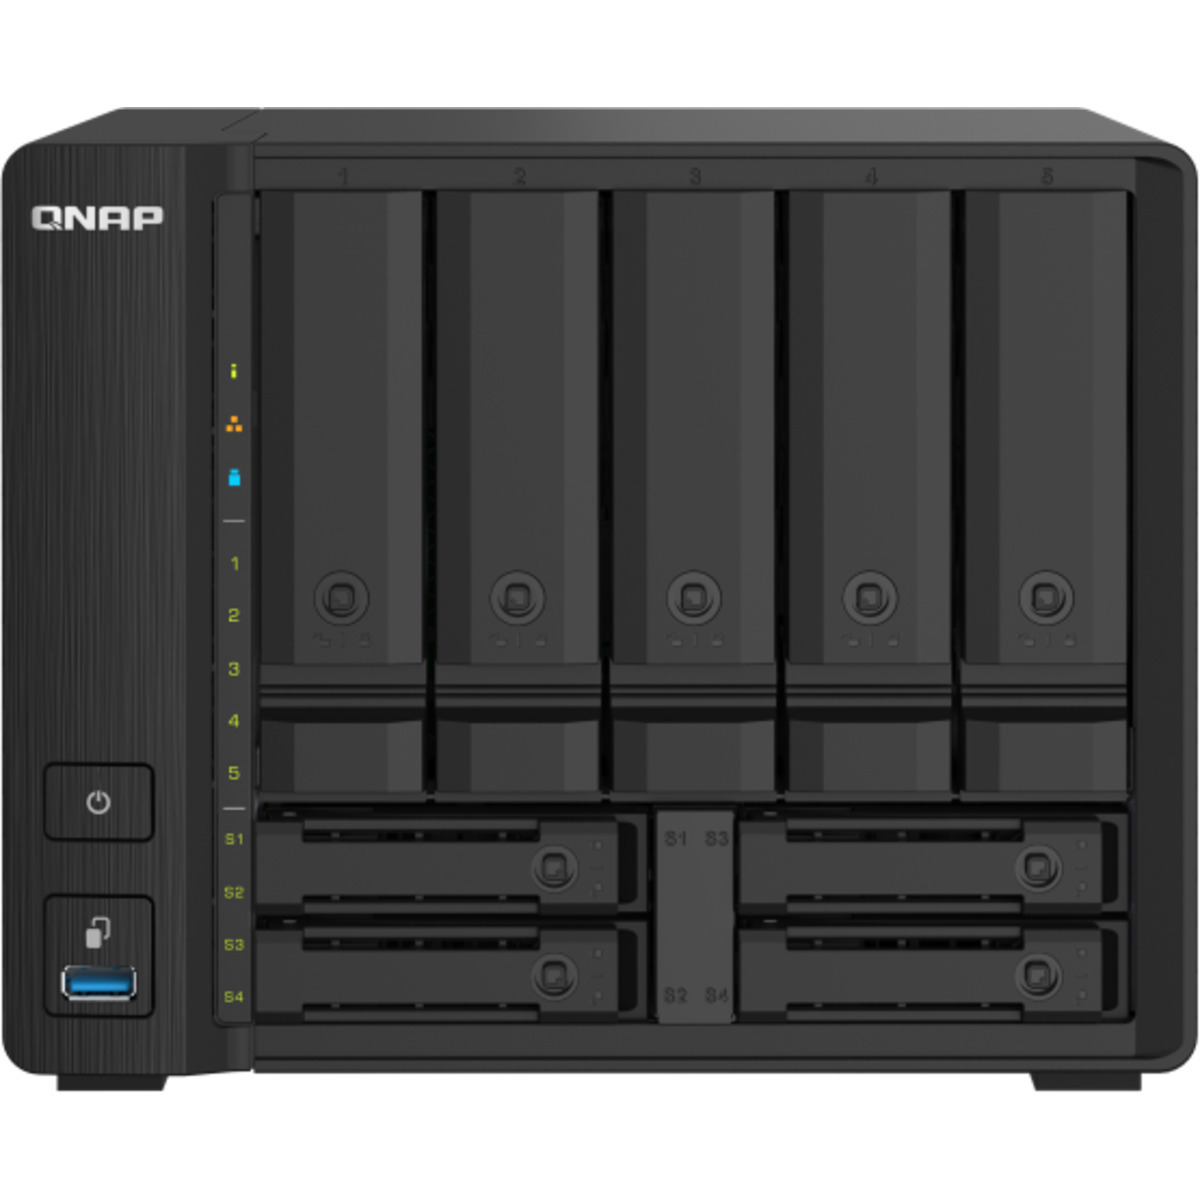 QNAP TS-932PX 12tb 5+4-Bay Desktop Multimedia / Power User / Business NAS - Network Attached Storage Device 3x4tb Samsung 870 EVO MZ-77E4T0BAM 2.5 560/530MB/s SATA 6Gb/s SSD CONSUMER Class Drives Installed - Burn-In Tested - ON SALE - FREE RAM UPGRADE TS-932PX